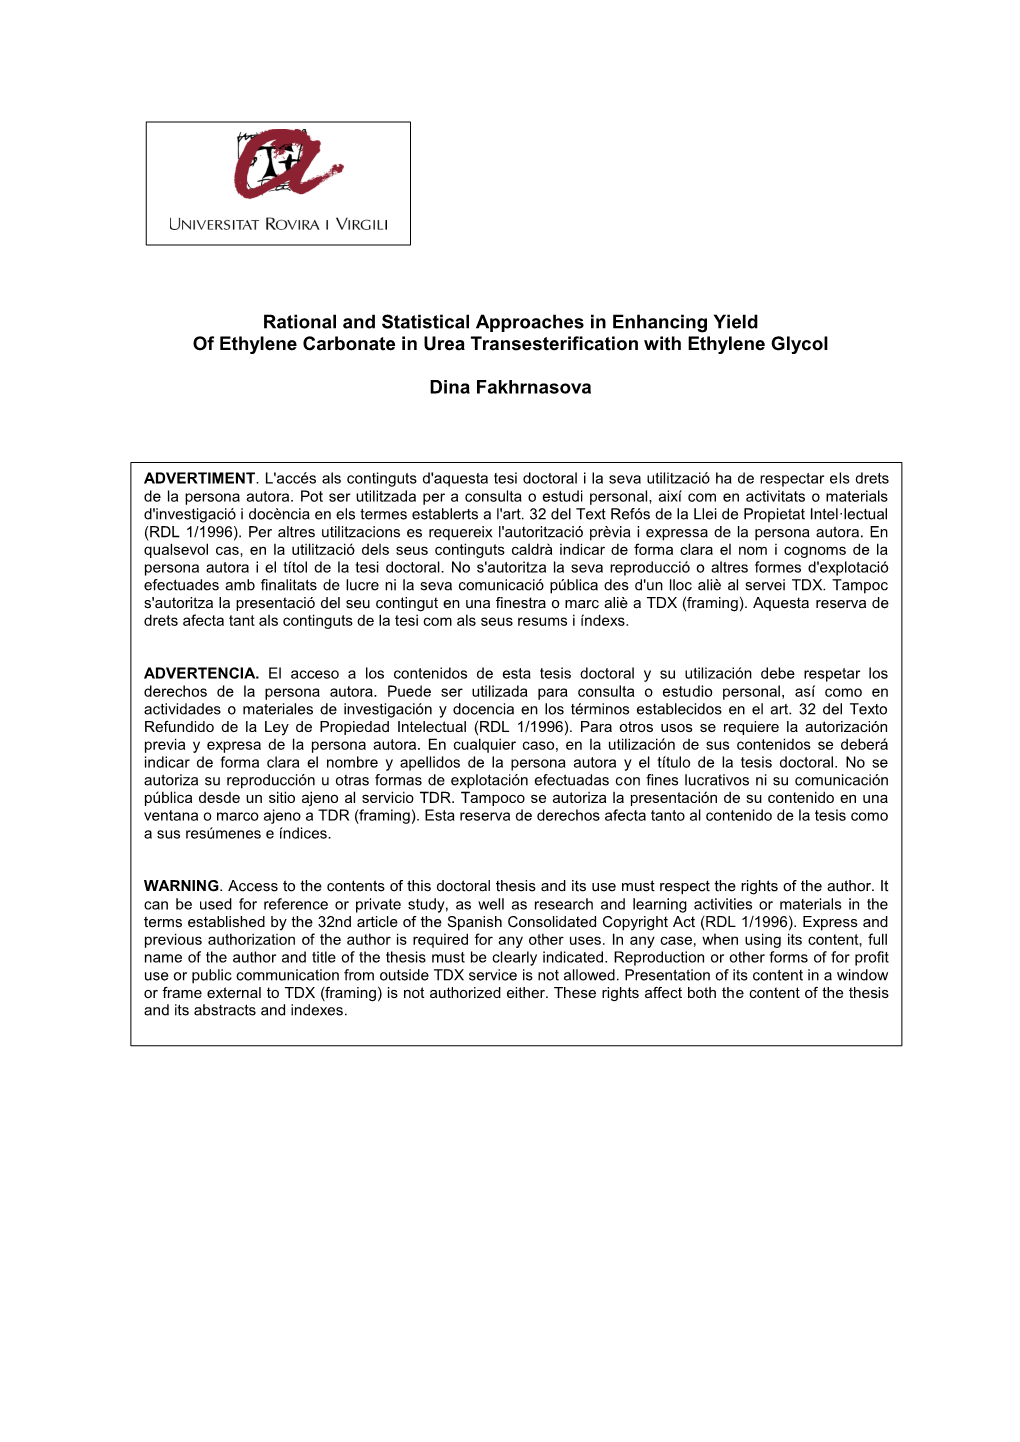 Rational and Statistical Approaches in Enhancing Yield of Ethylene Carbonate in Urea Transesterification with Ethylene Glycol